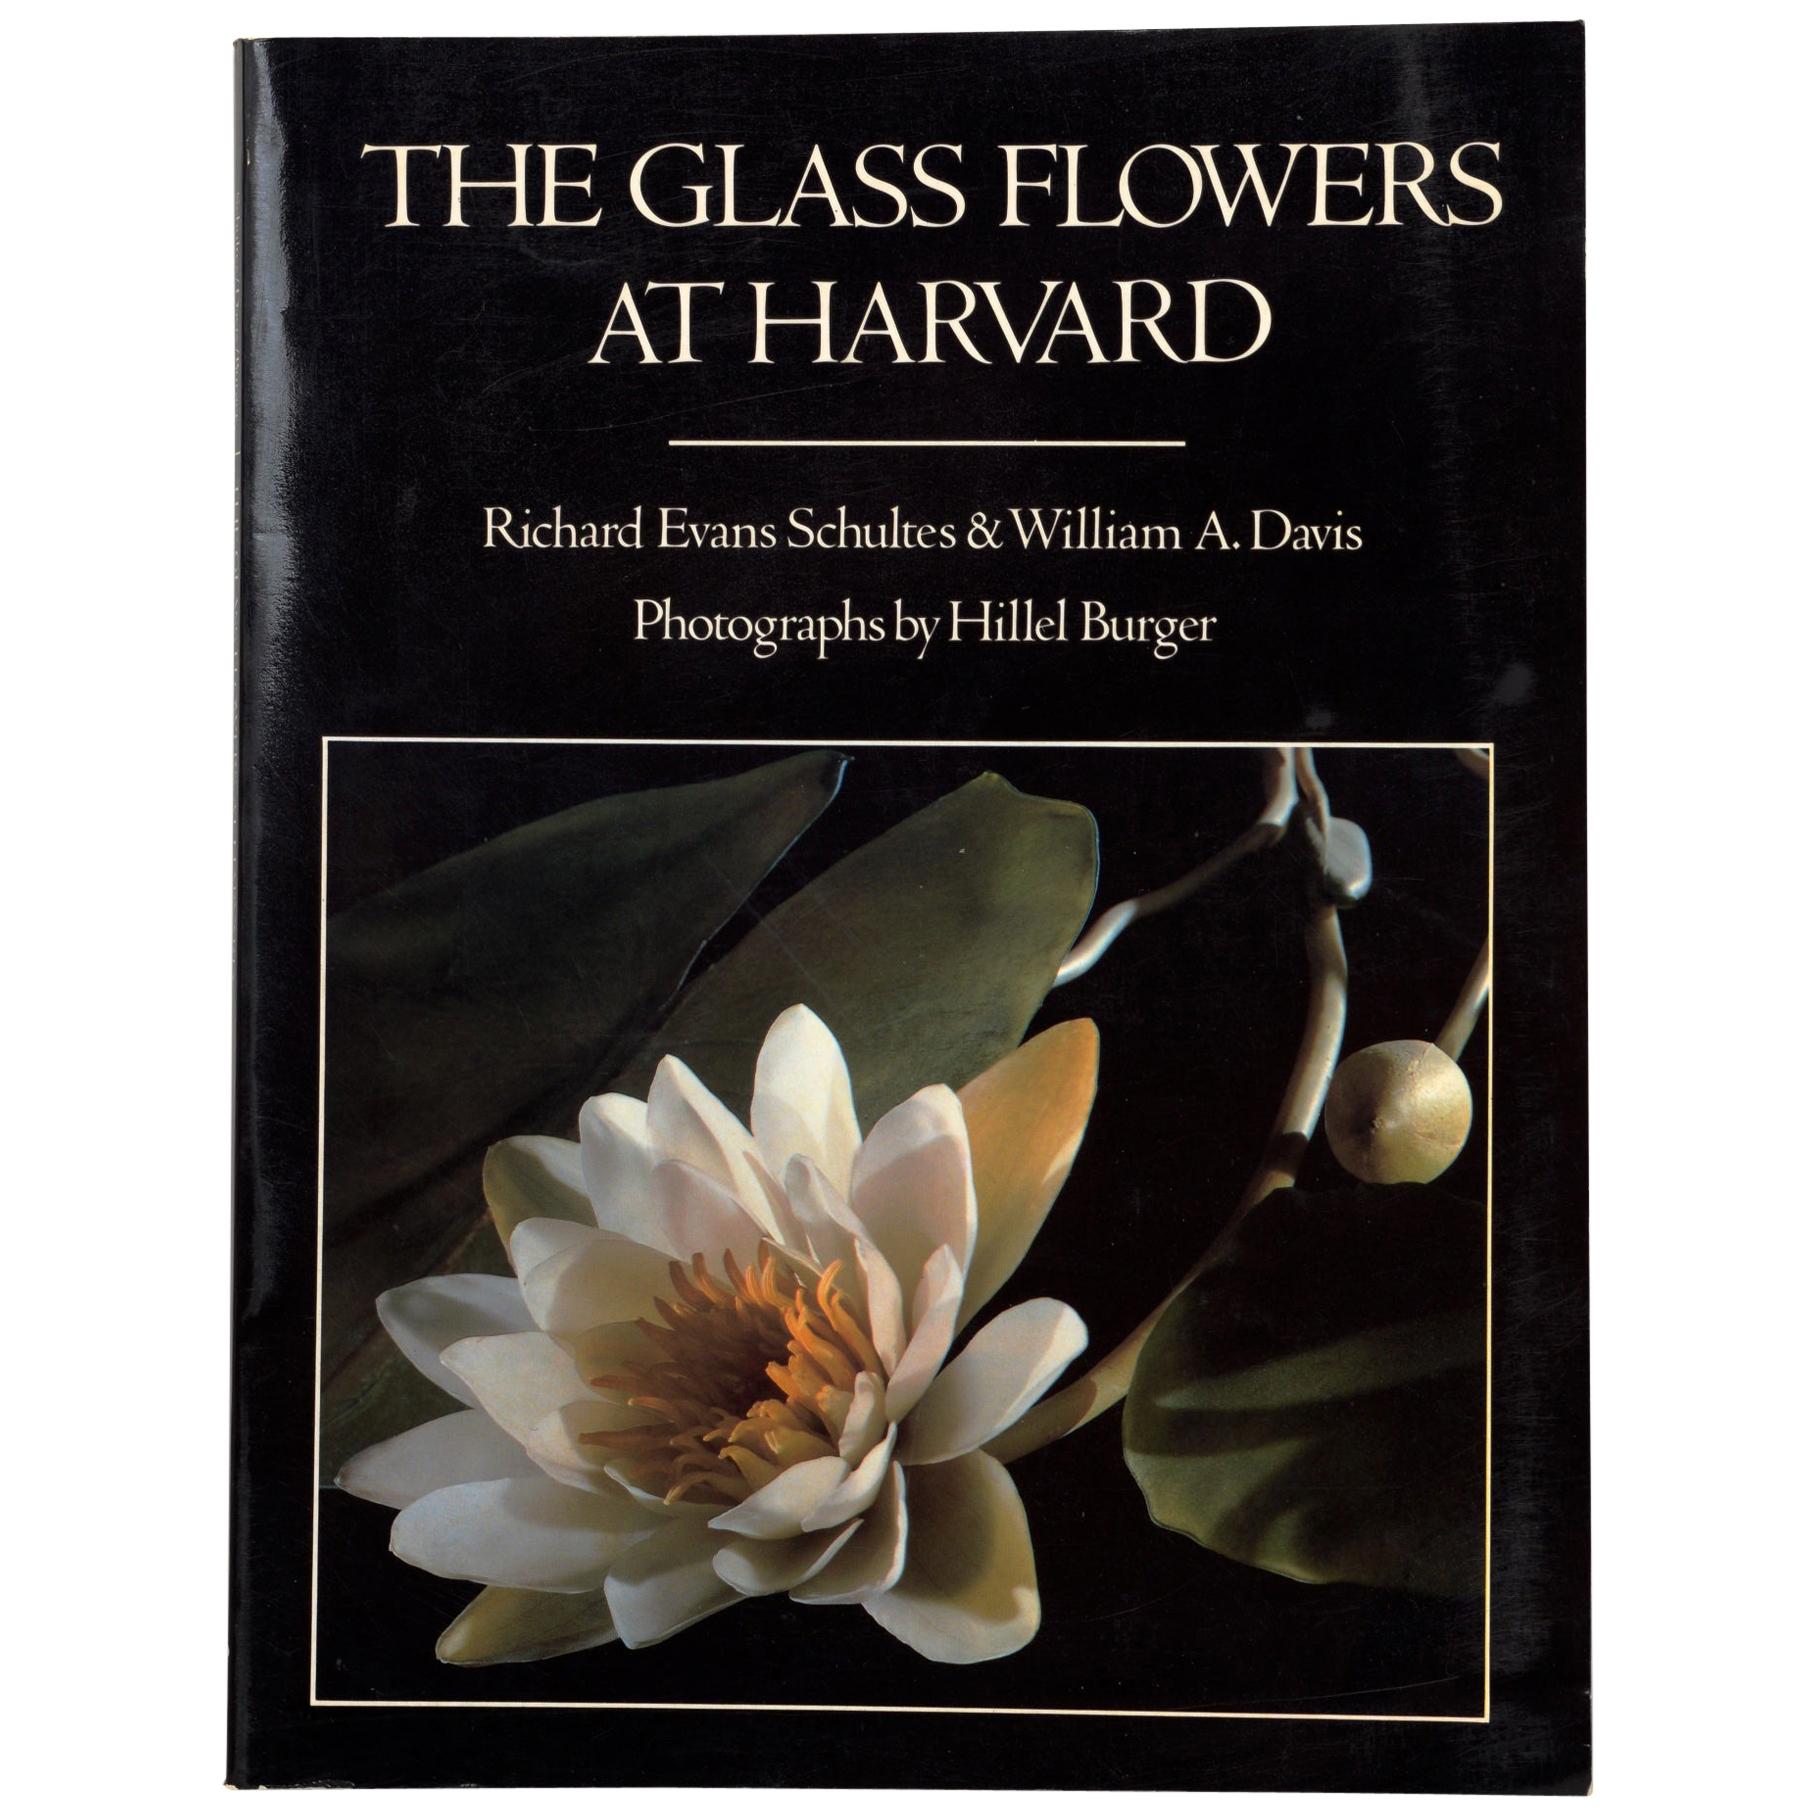 The Glass Flowers at Harvard by Richard Evans Schultes, First Edition